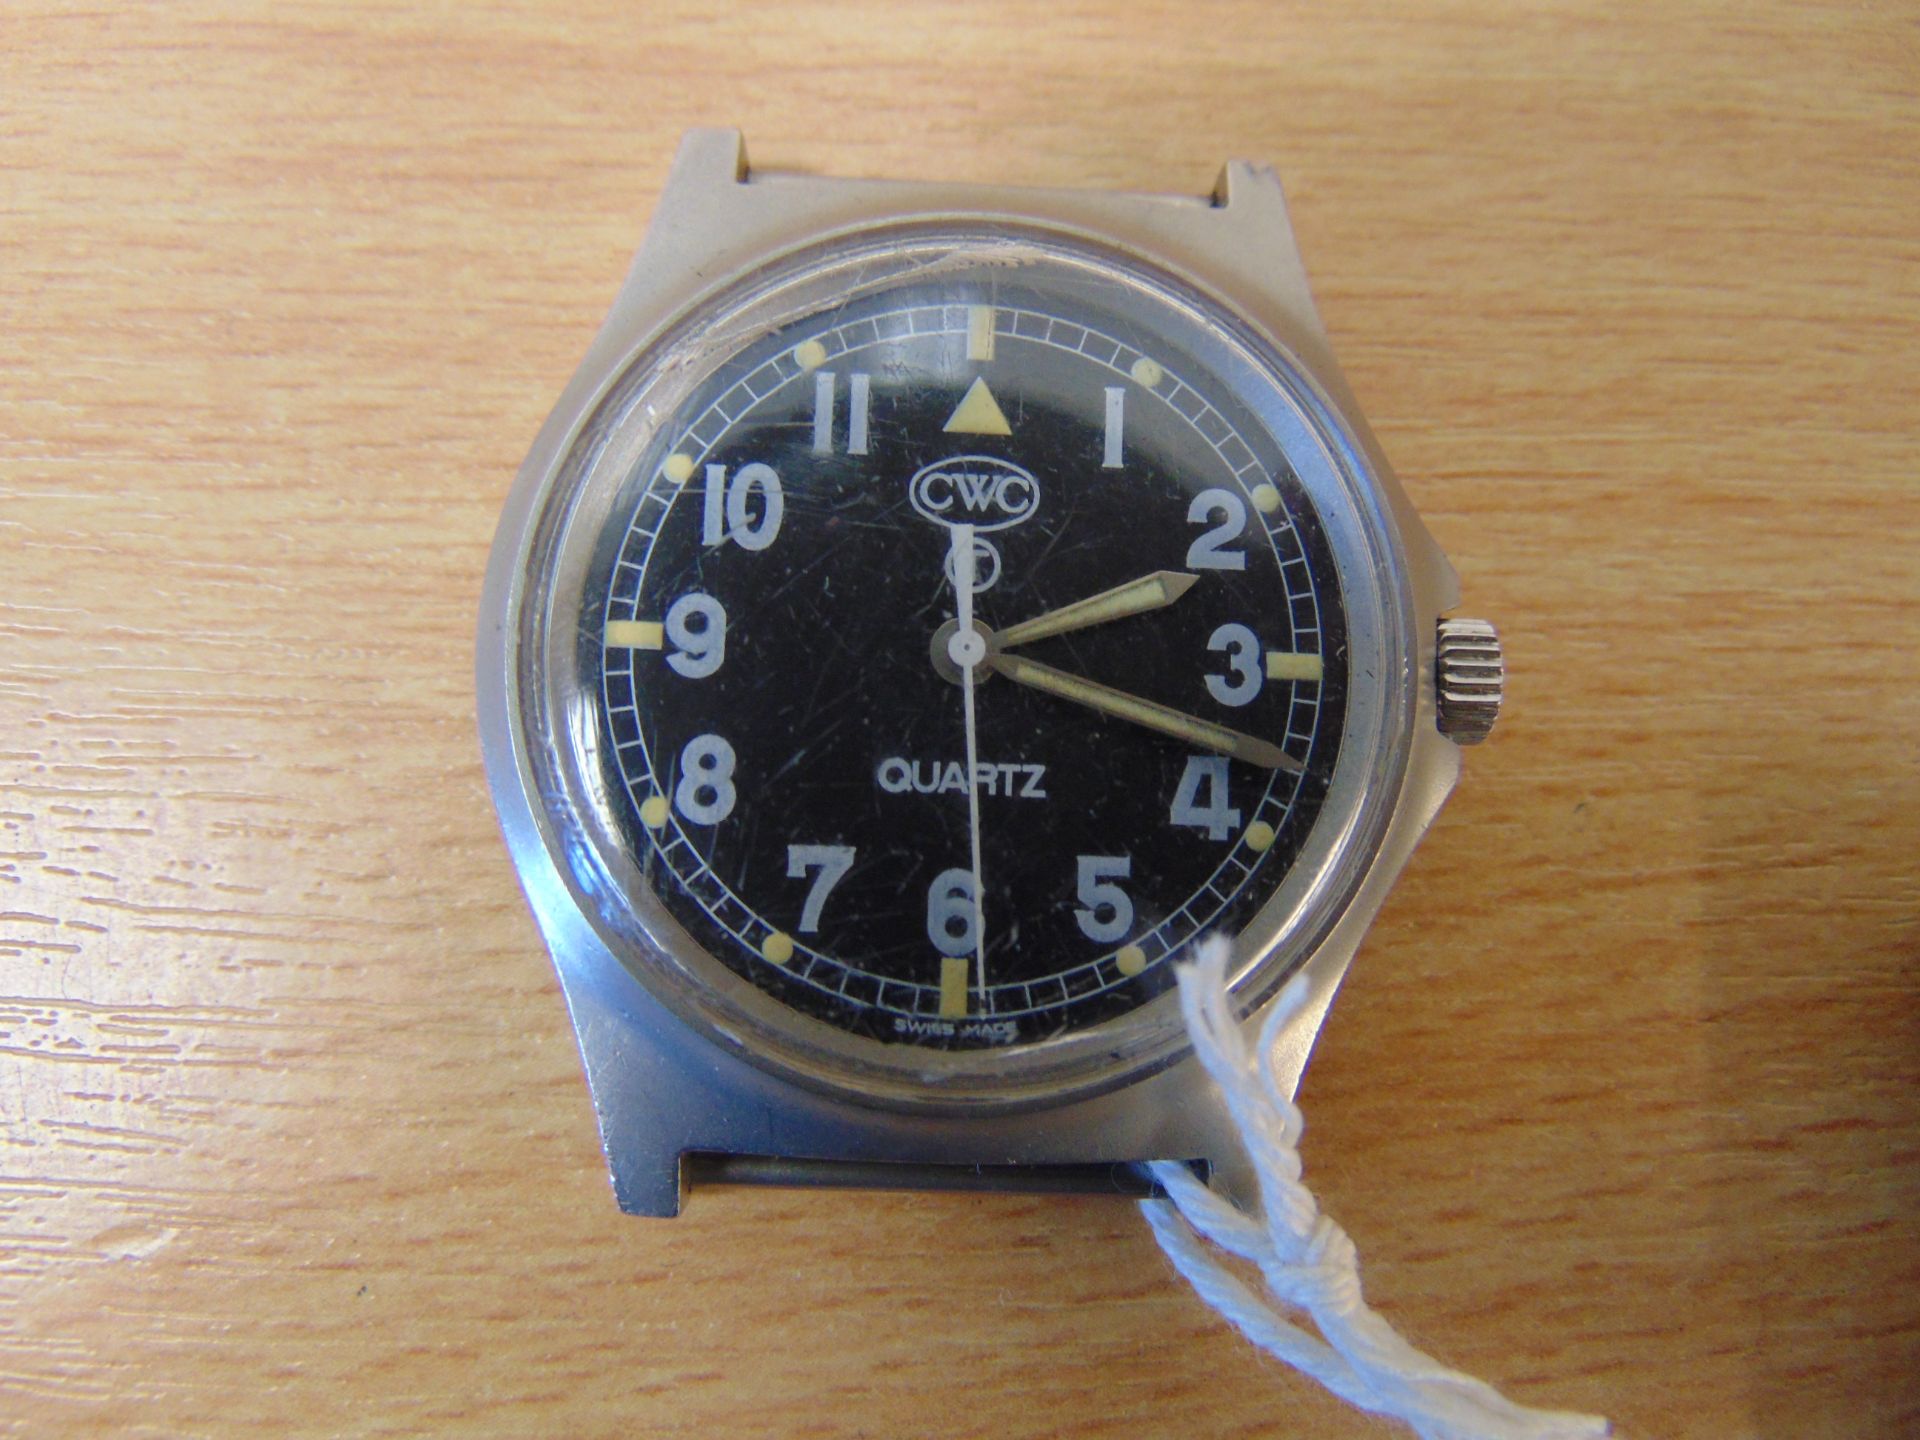 CWC 0555 R.Marines service watch with Nato Marks and broad arrow, small chip in glass, Date 1995 - Image 2 of 4